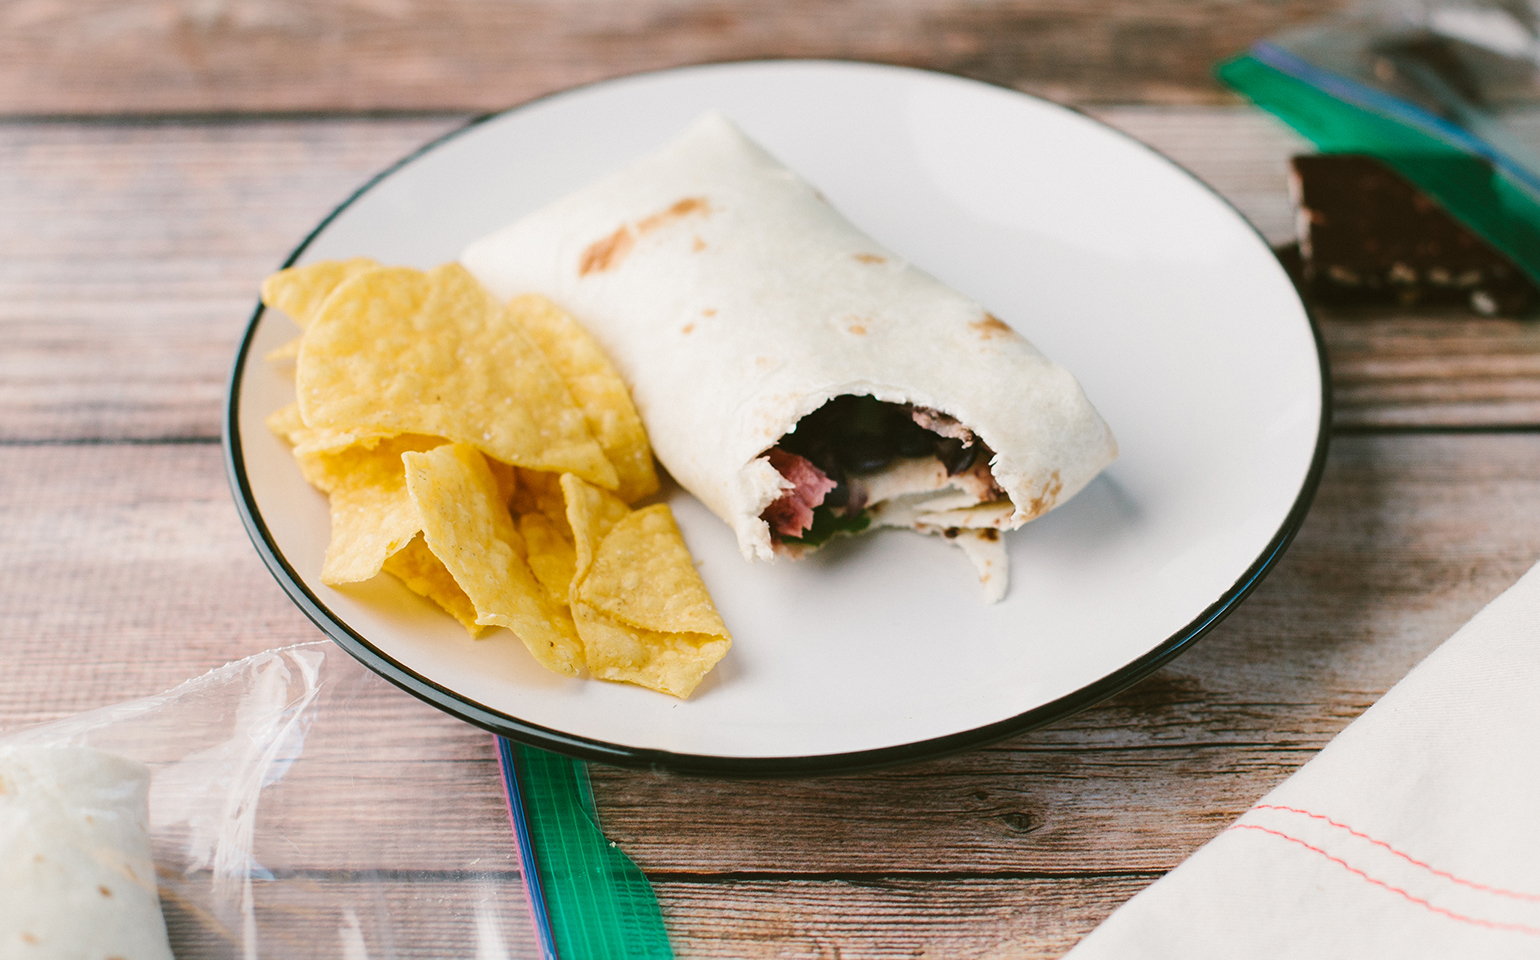 Steak and Black Bean Burritos with Red Onion and Avocado